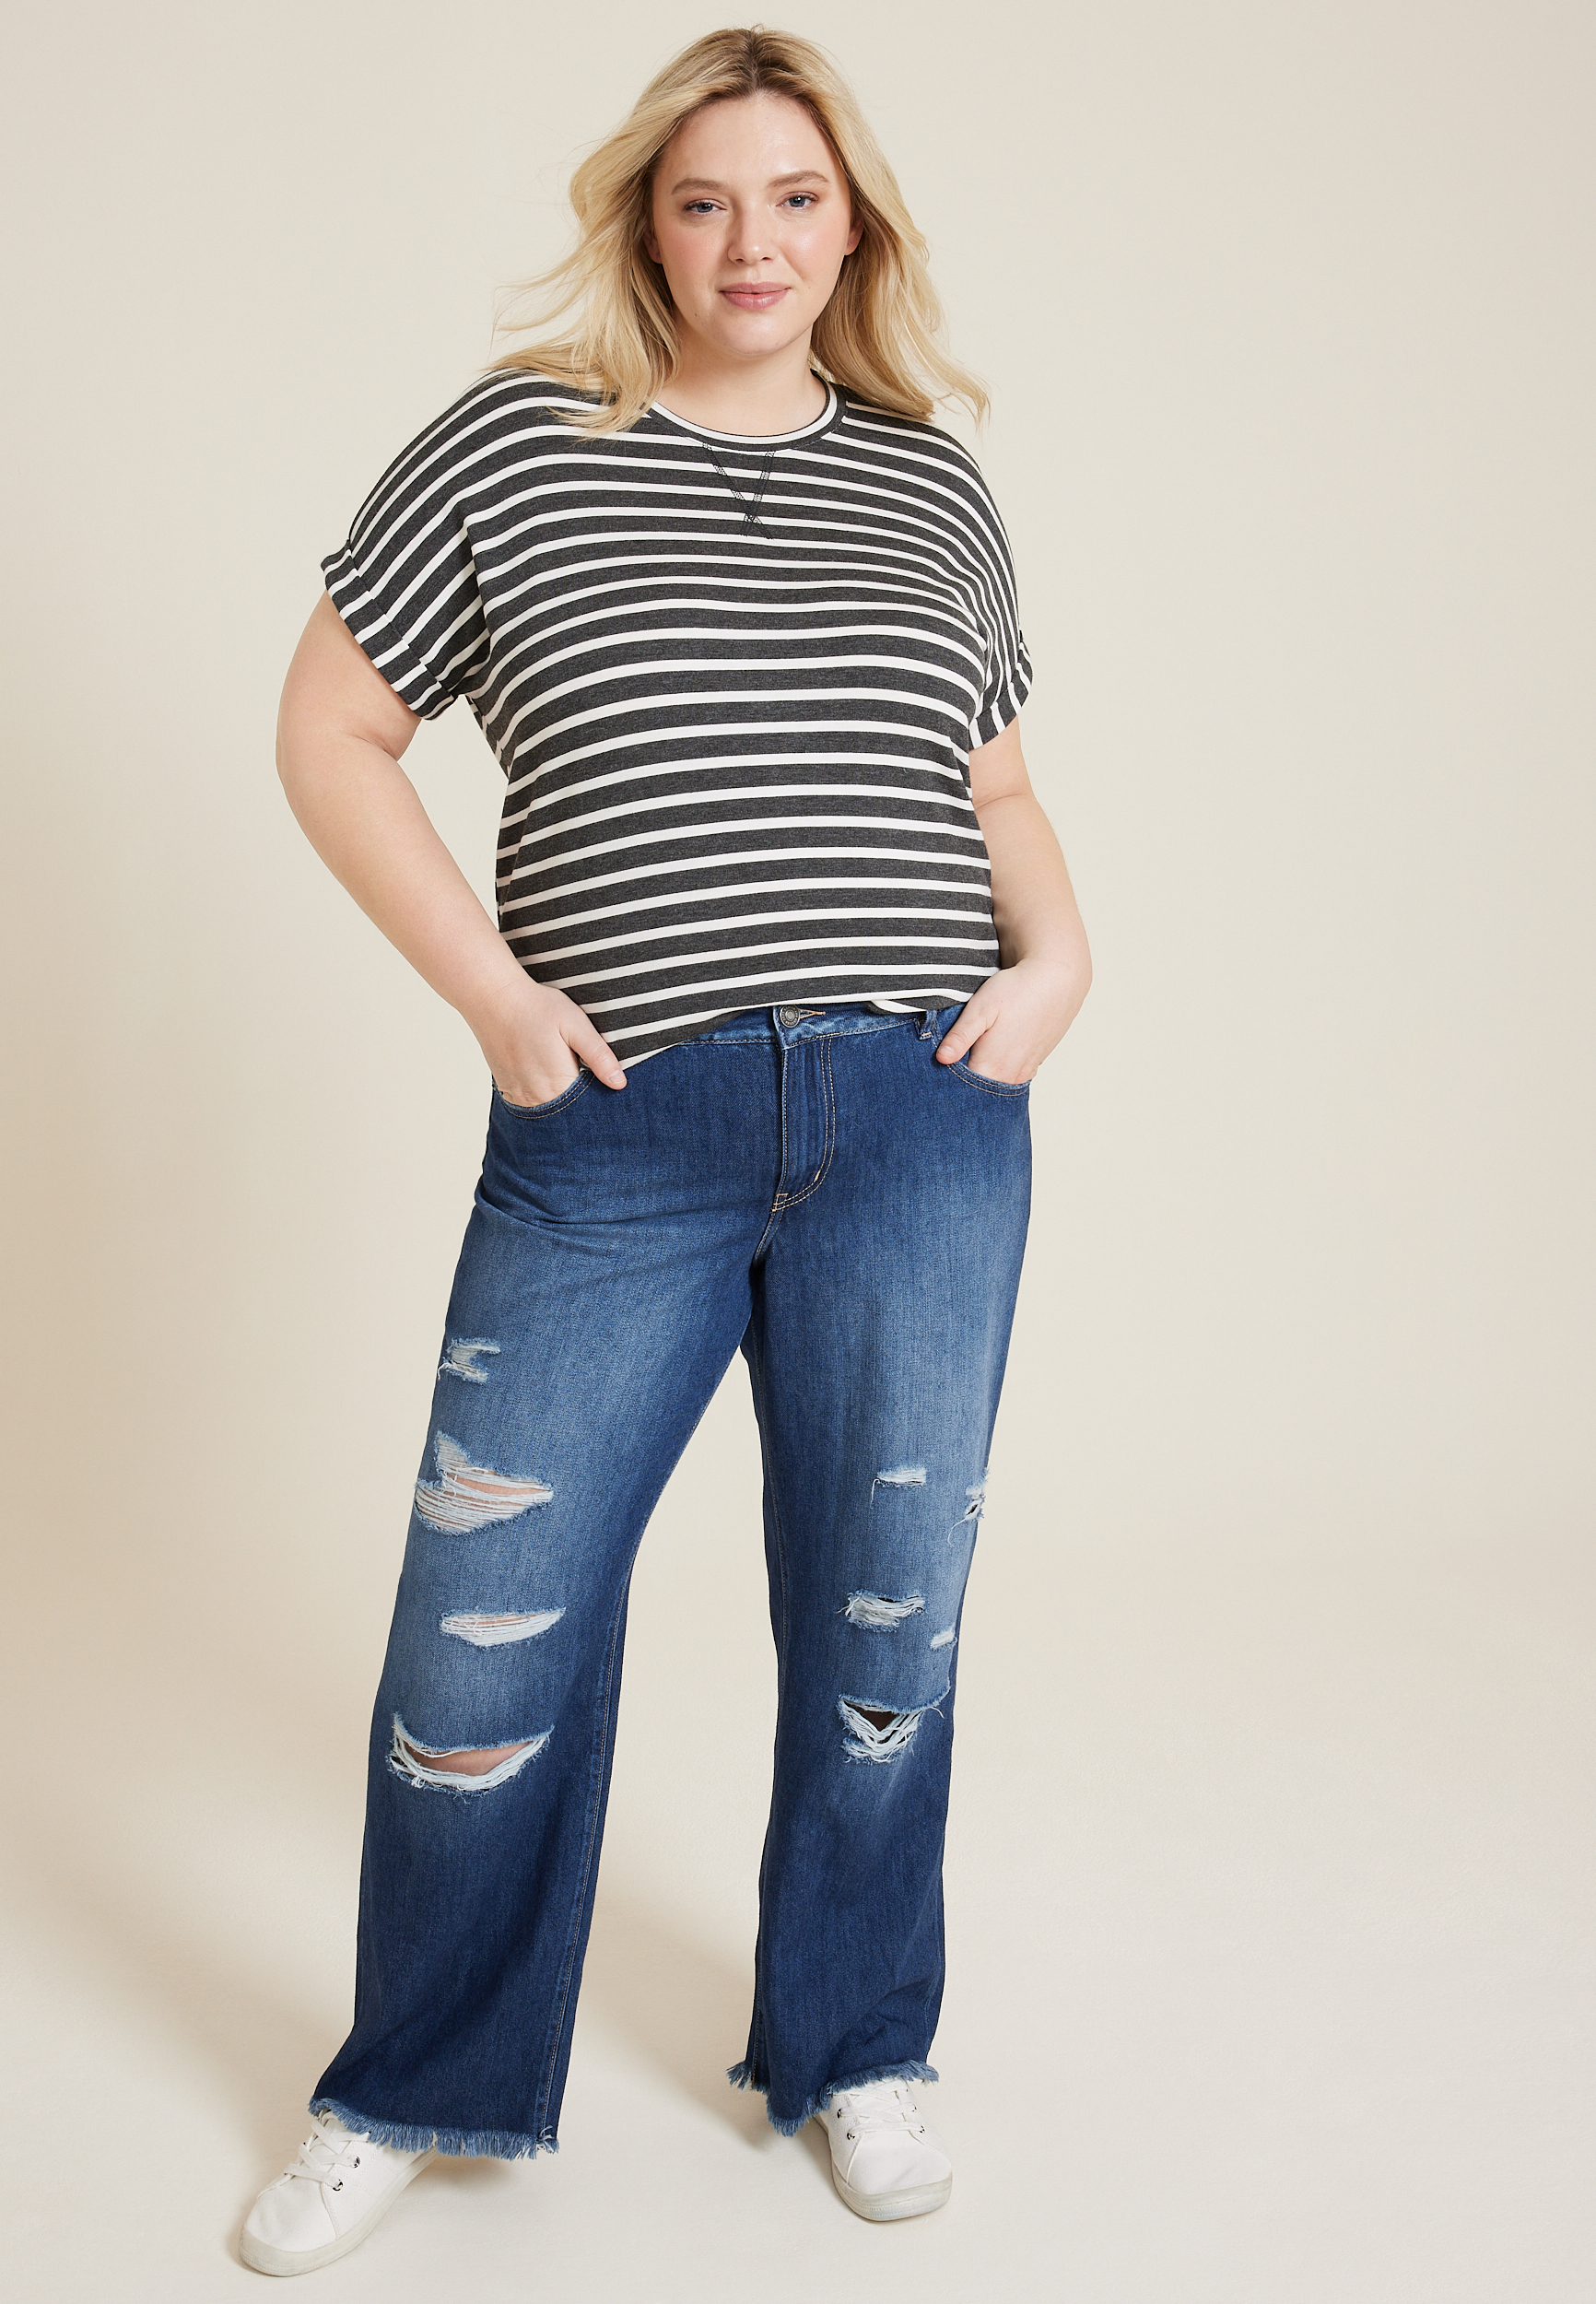 Plus Size 3D Jeans Lace-up Pattern Printed Pull On Flare 70s 80s Disco Pants  [59% OFF]